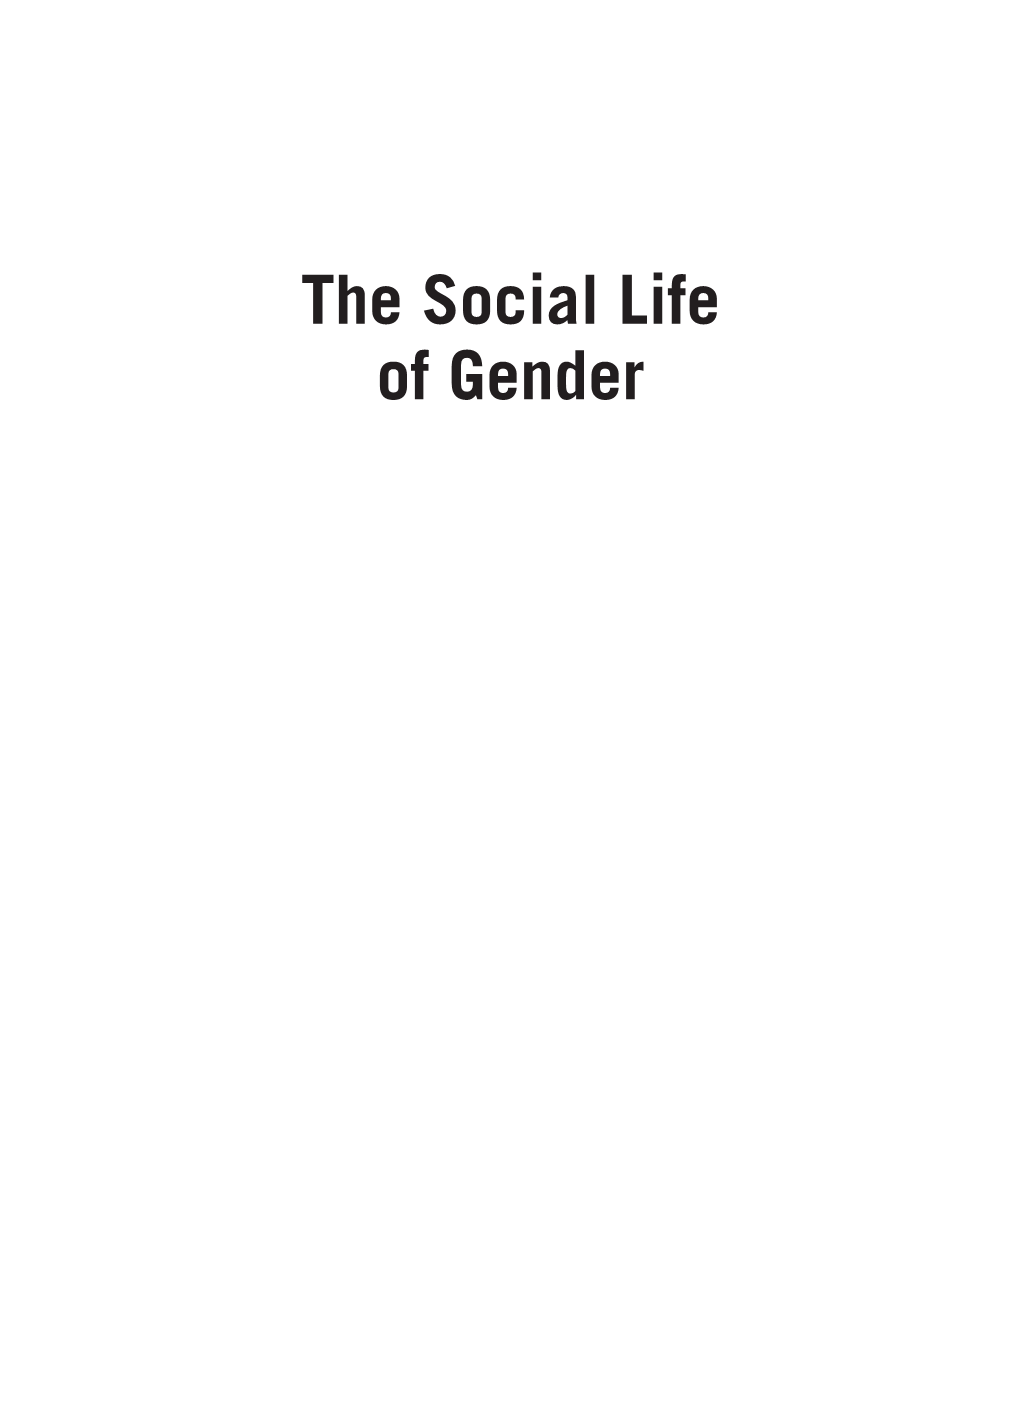 The Social Life of Gender Dedicated to Saba Mahmood, Whose Brilliant Scholarship Has ­Challenged and Inspired Our Thinking About the Meaning and Goals of Feminism